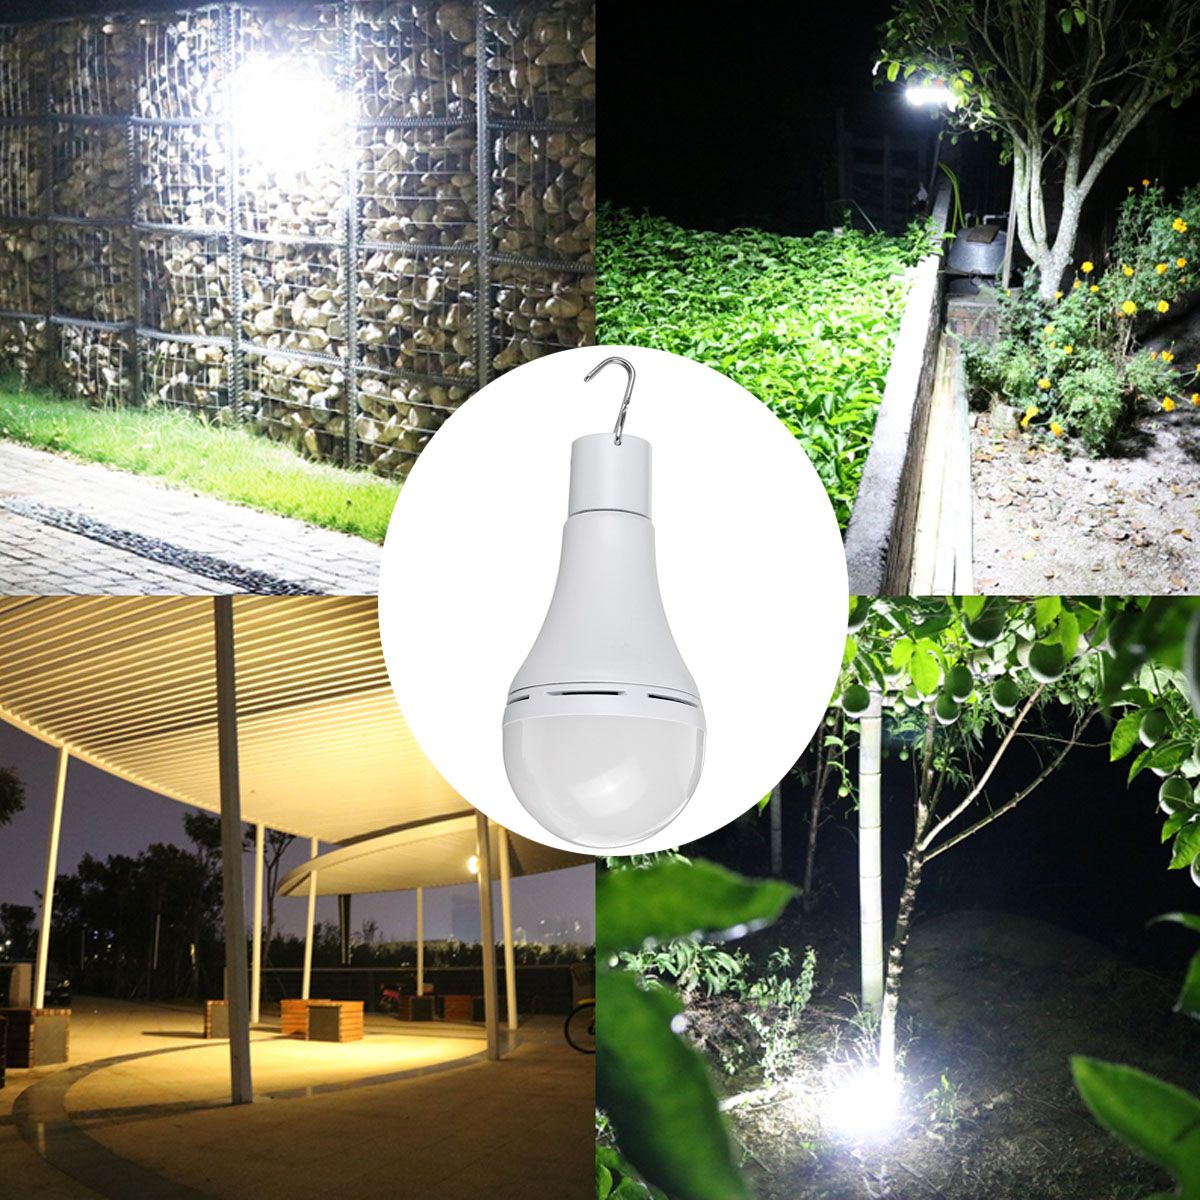 Portable-Solar-Powered-LED-Light-Bulb-Remote-Control-7W-9W-Hang-Up-Lamp-Camping-1724061